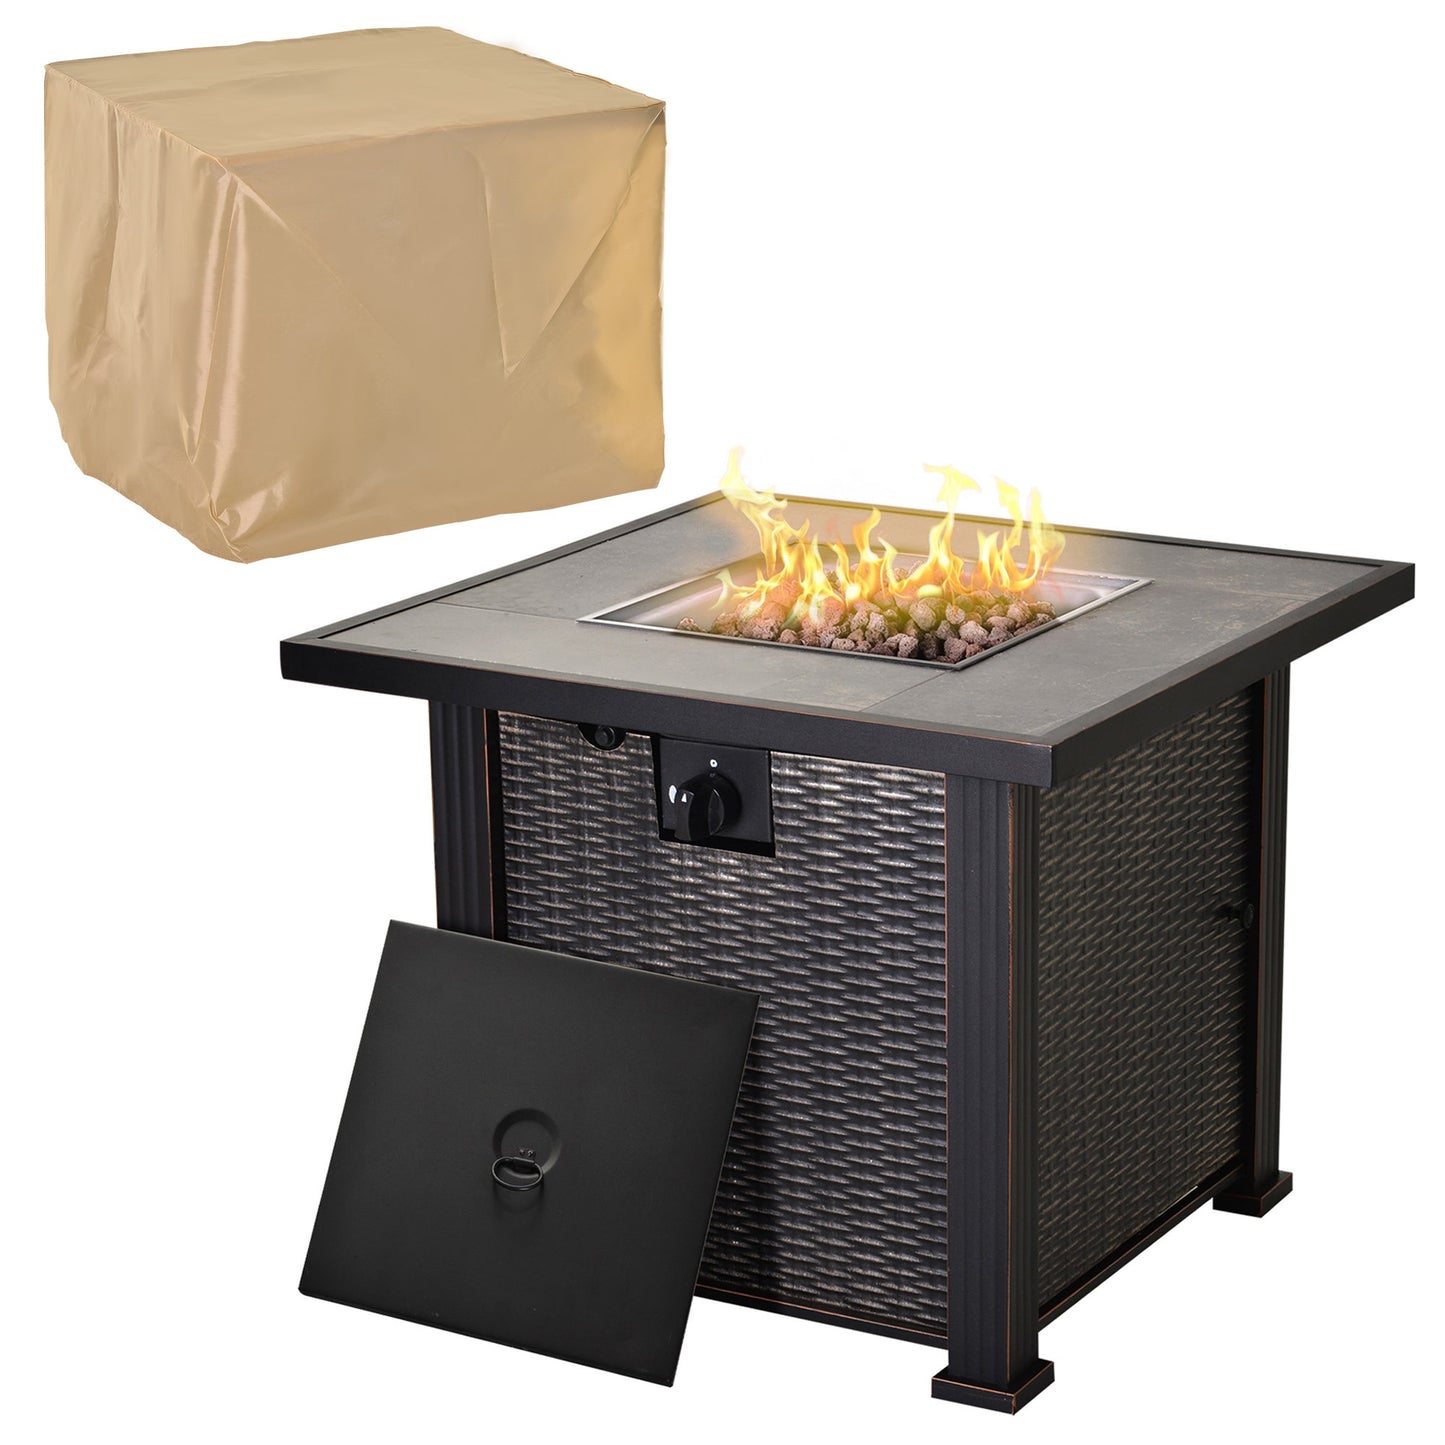 Outdoor and Garden-30" 50 000 BTU Outdoor Patio Backyard Gas Fire Pit Table with Beautiful Slate Tabletop & Wicker Design - Outdoor Style Company